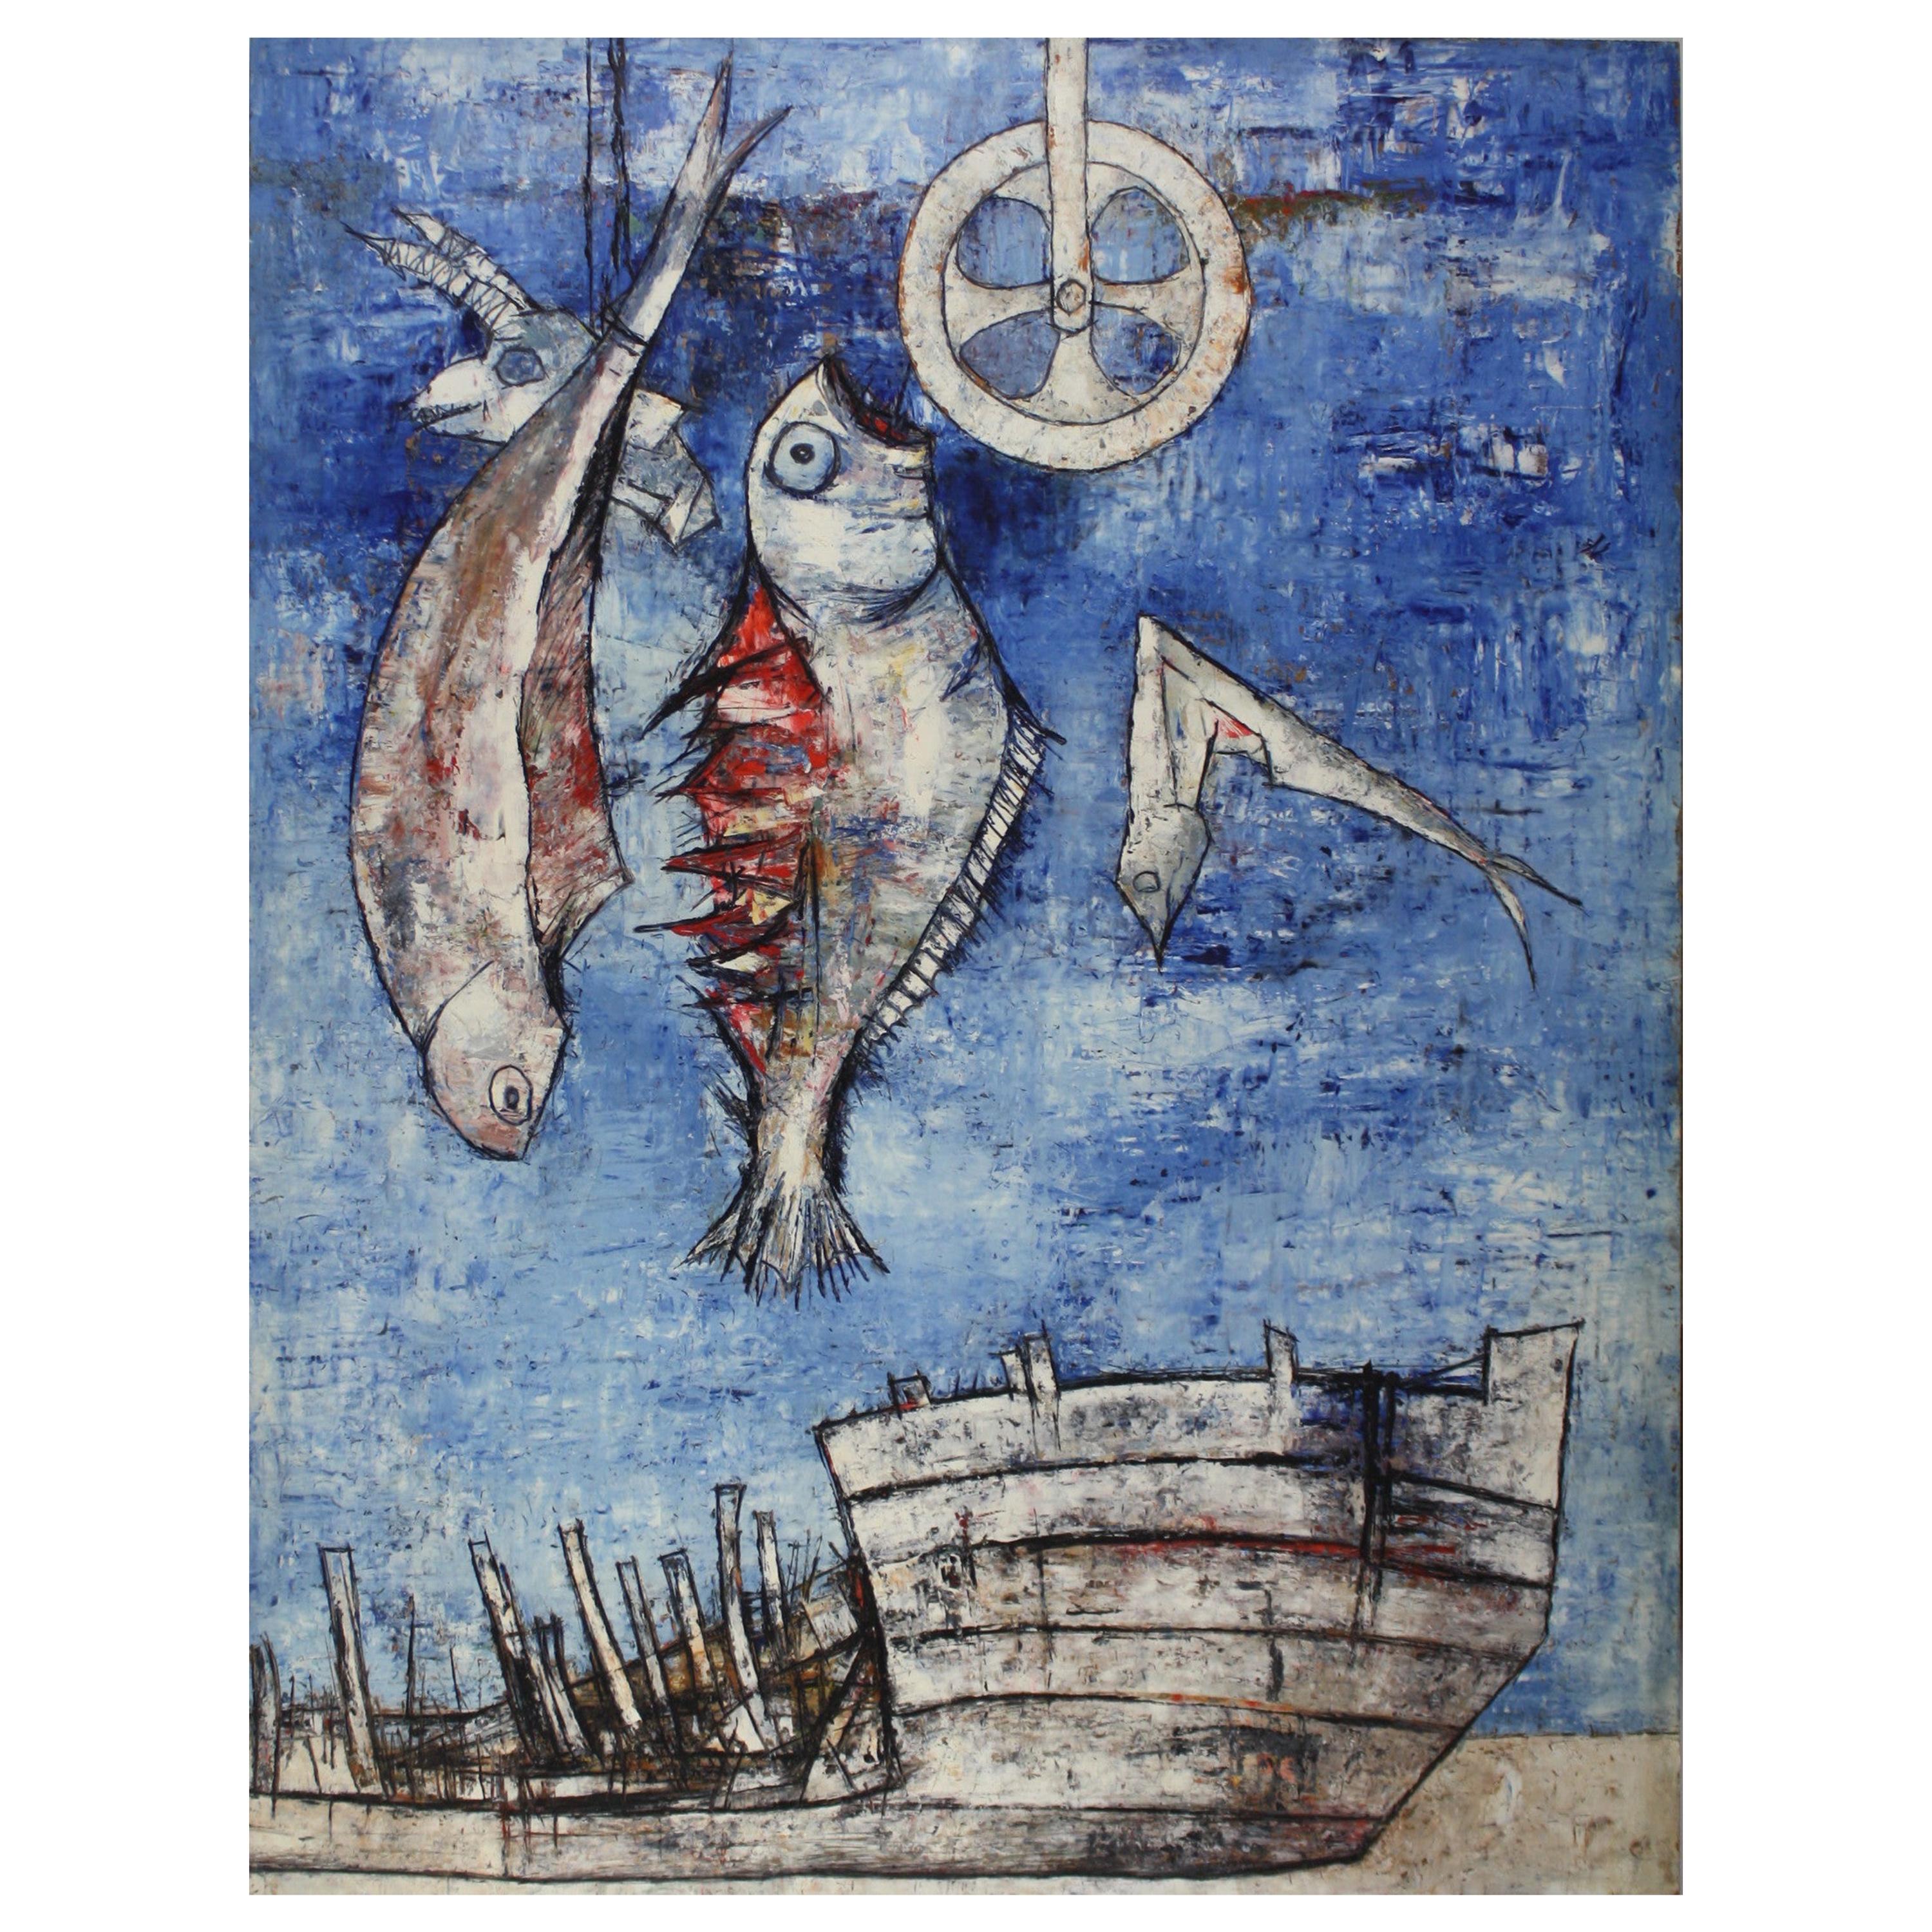 Catch of the Day Blue Vision of a Destroyed Ship on the Sand with Fishes Hanging For Sale